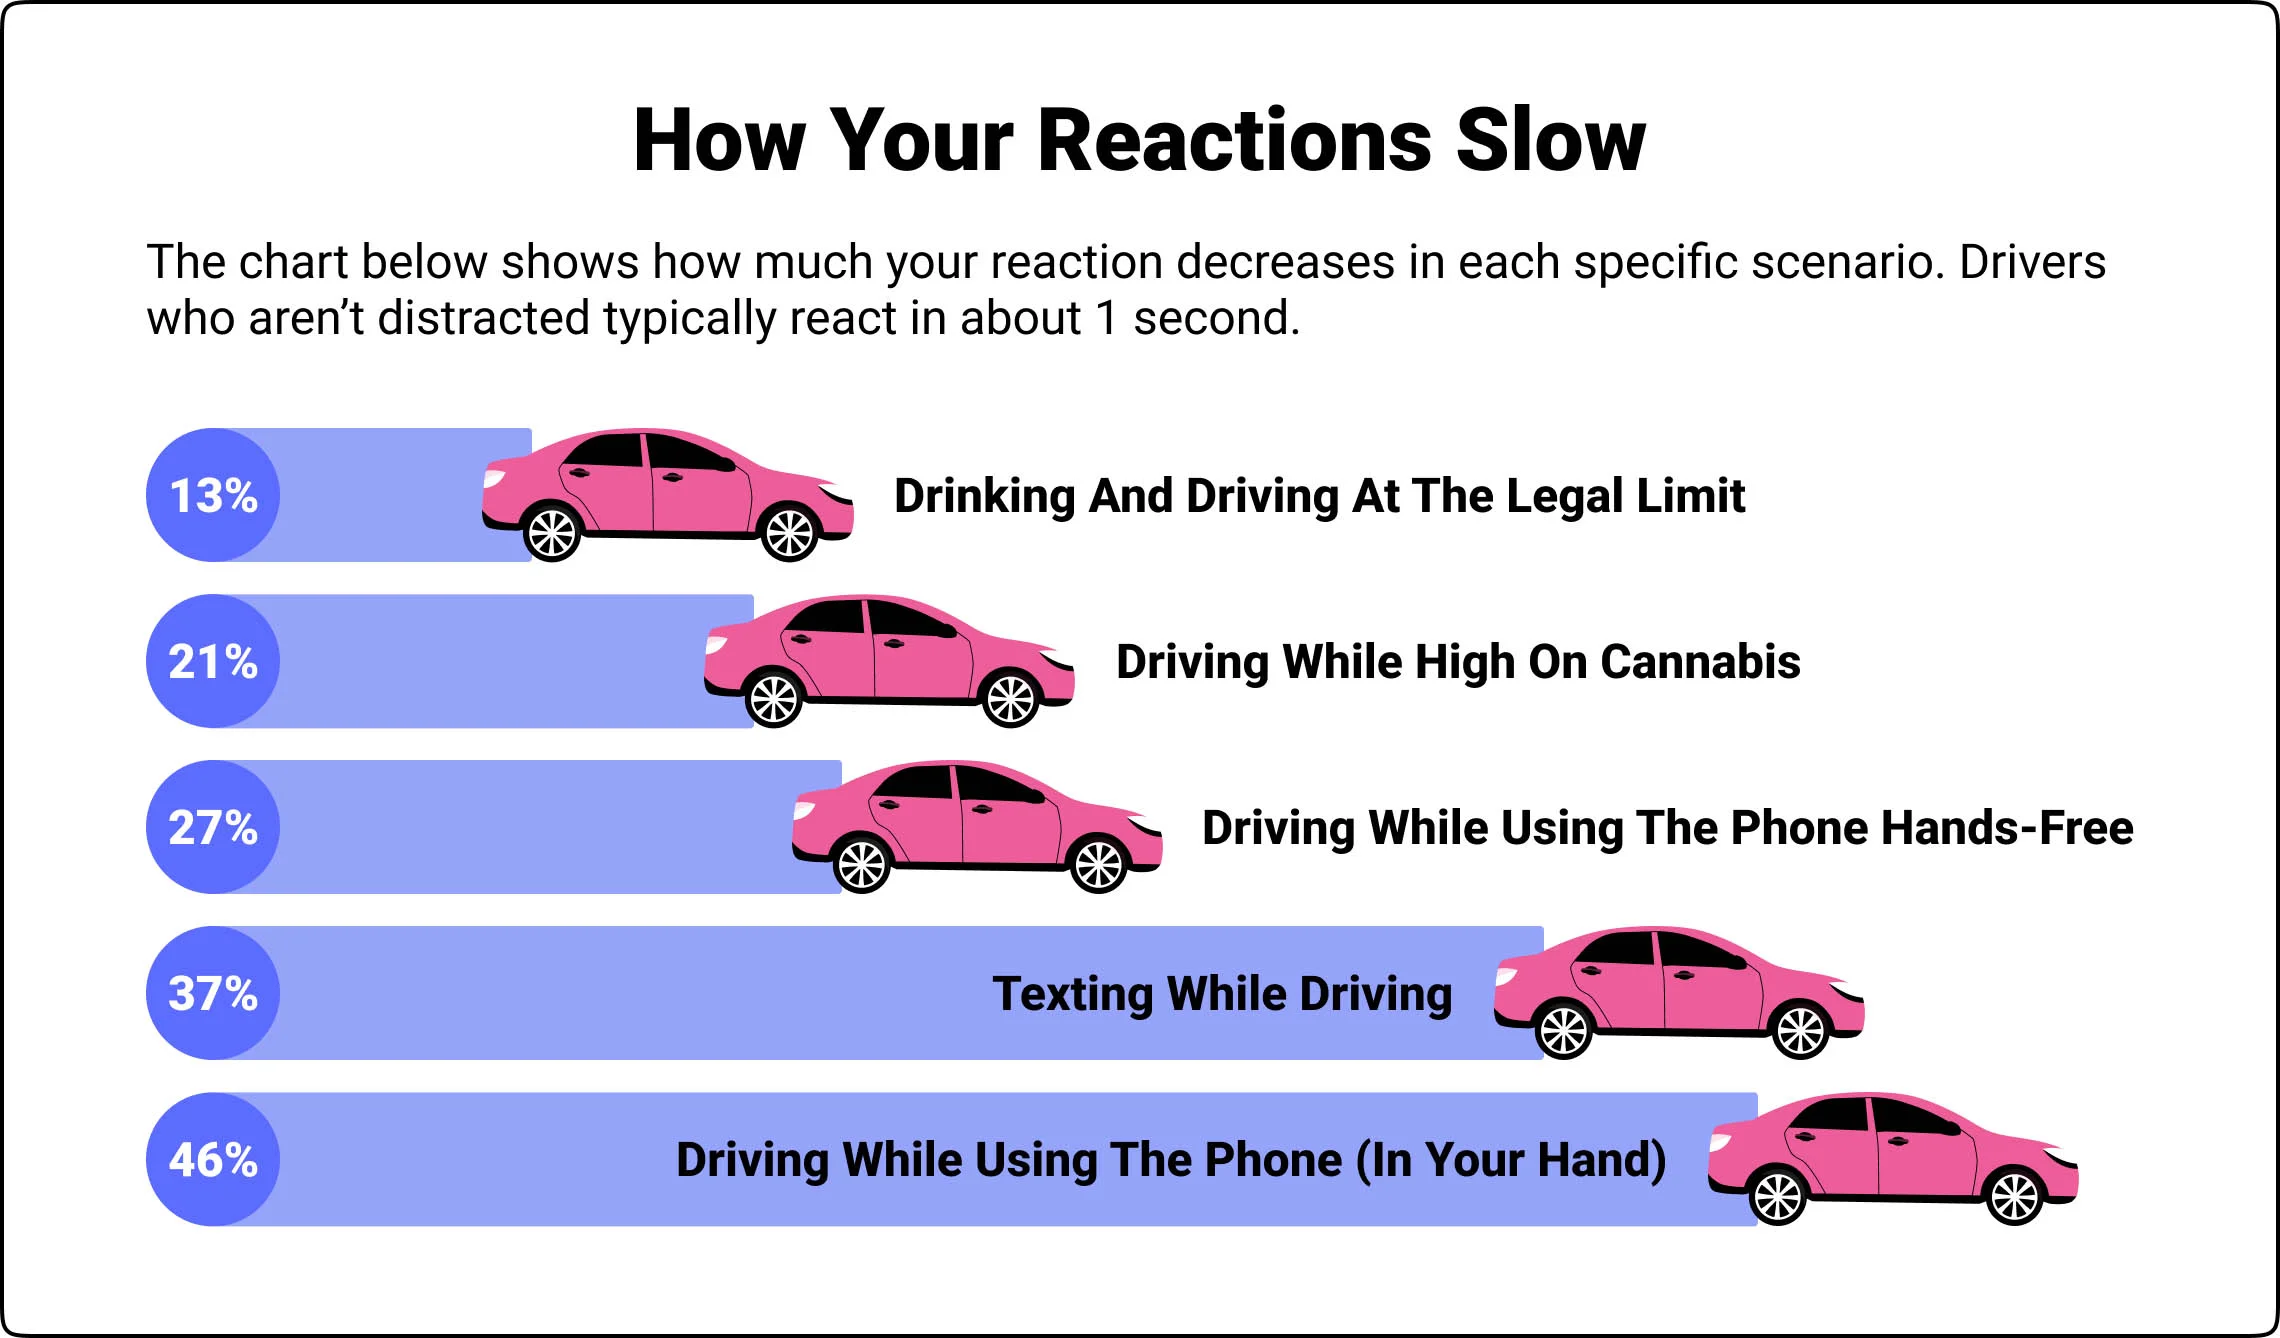 Texting and driving reaction times